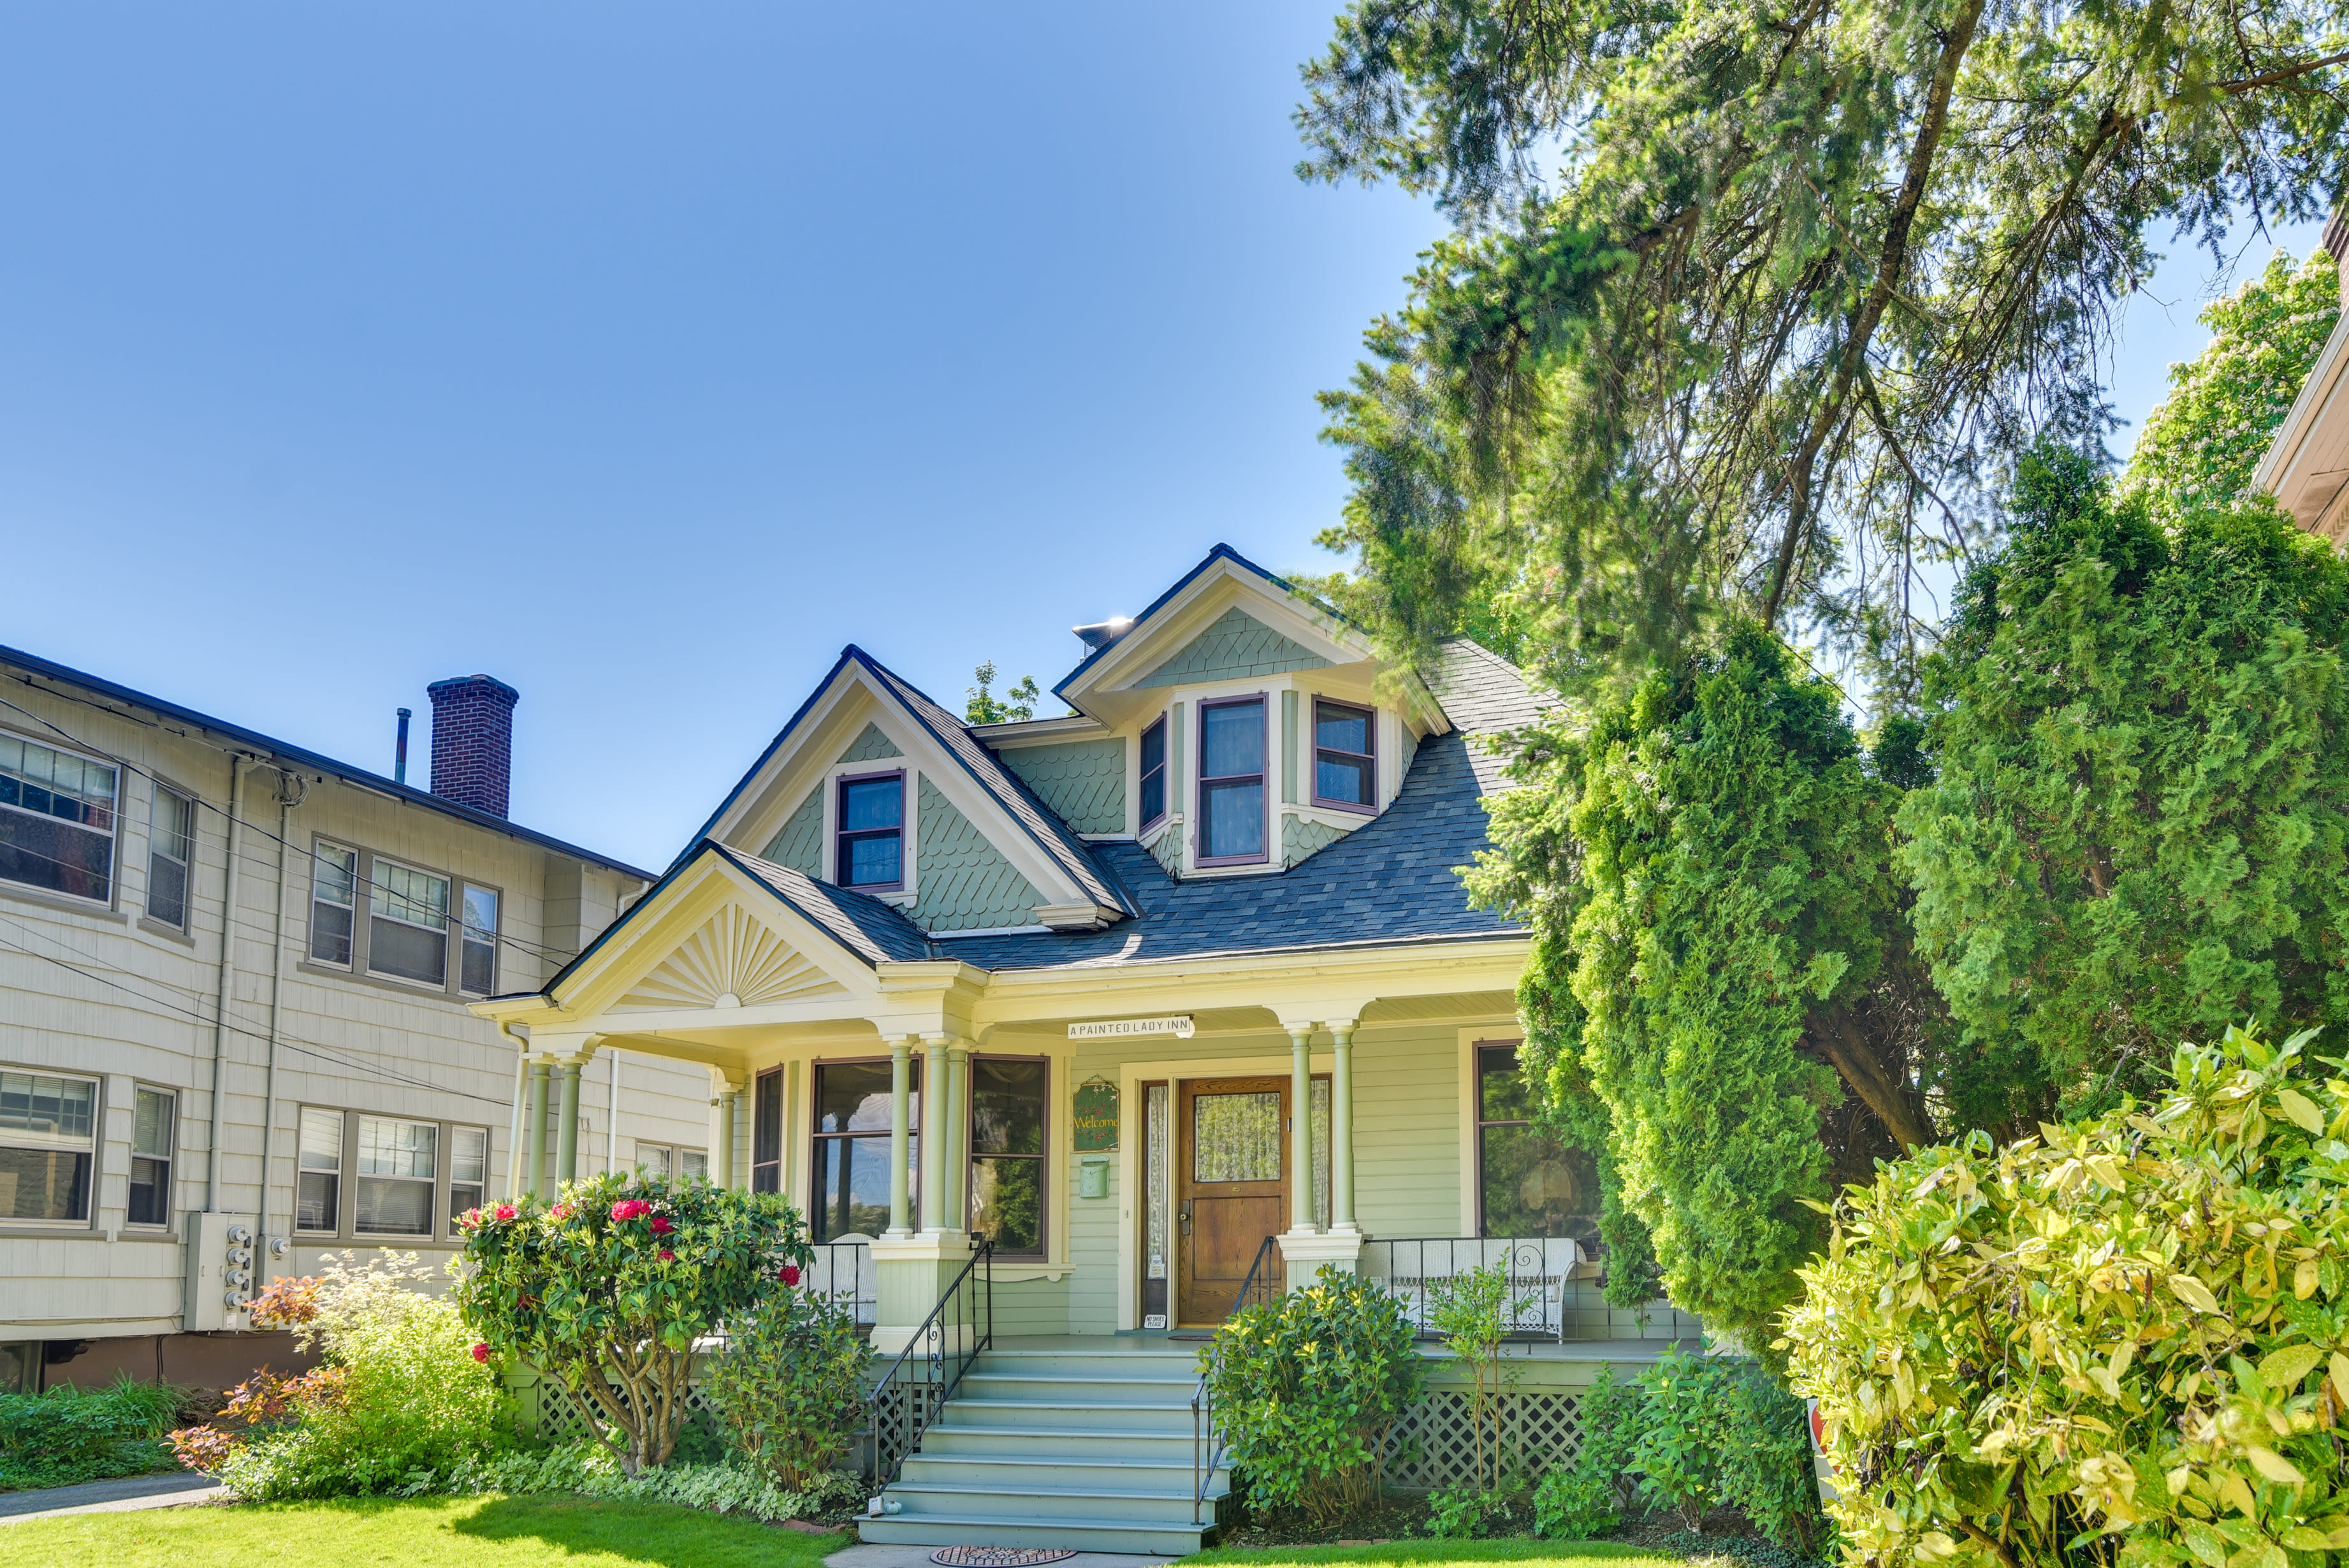 Historical Portland Home < 2 Mi to Downtown!